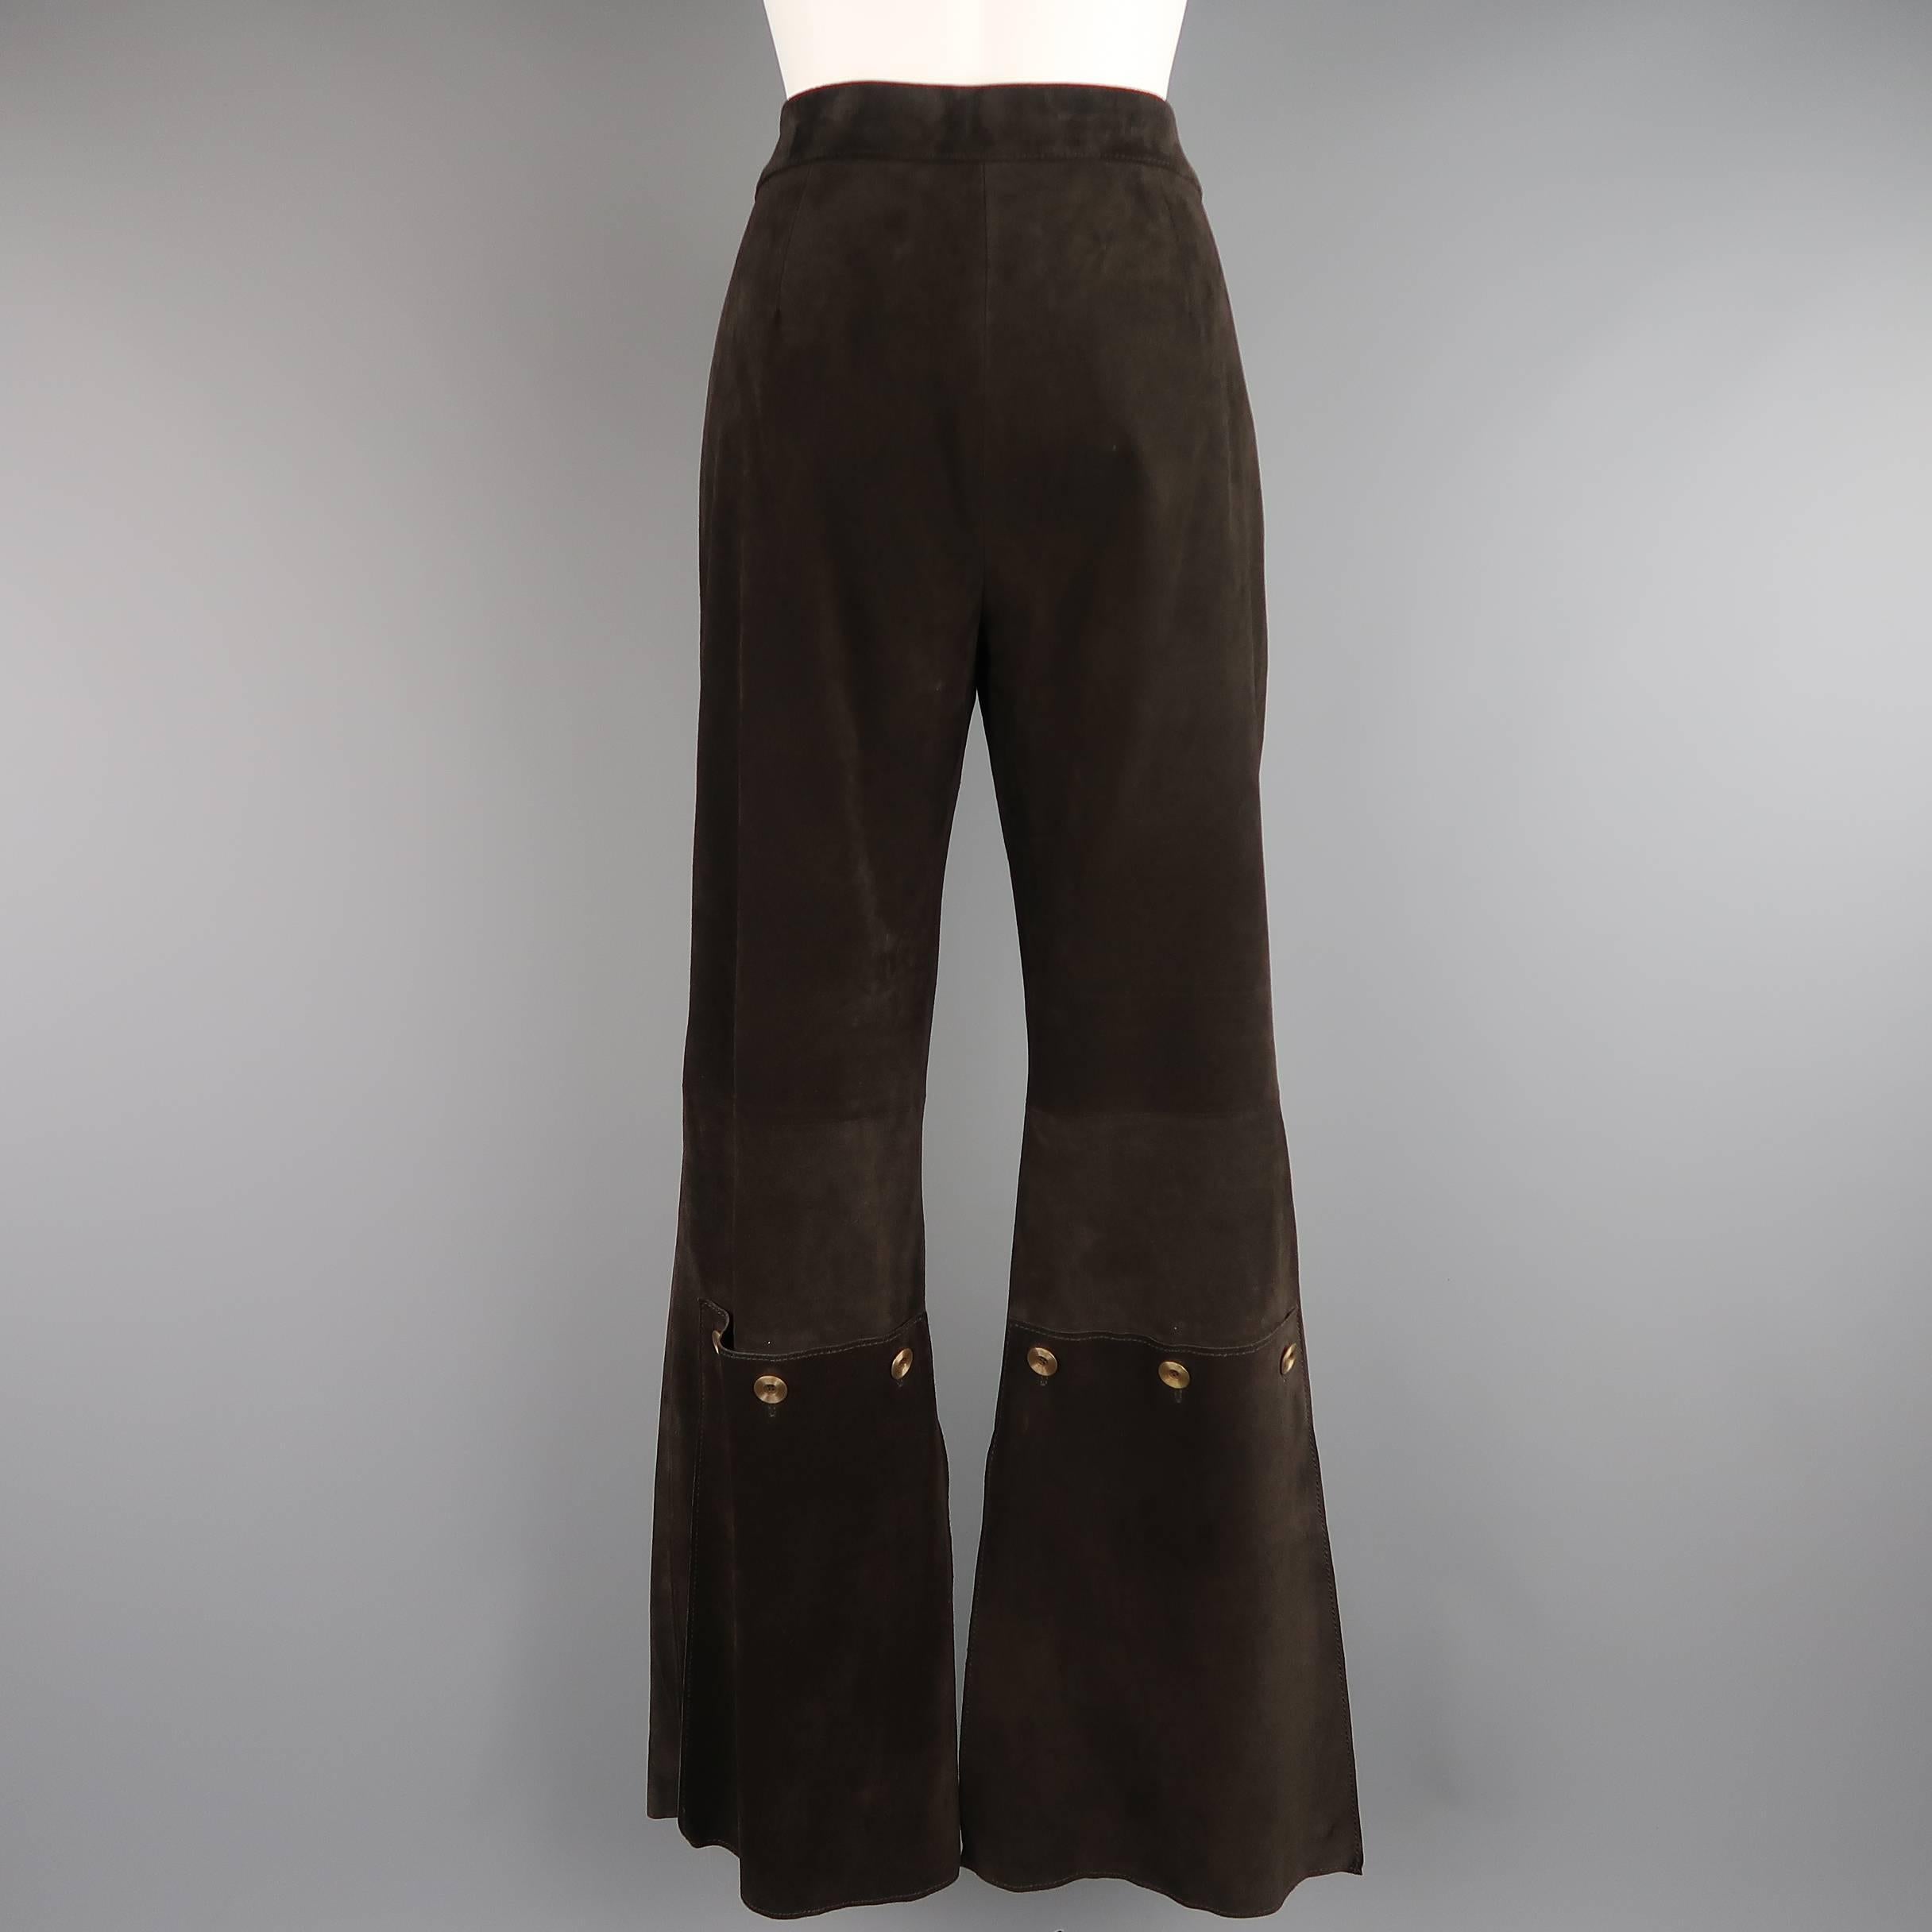 Women's Brown VALENTINO Pants Suede Bell Bottom Slit Flair - Size 8 